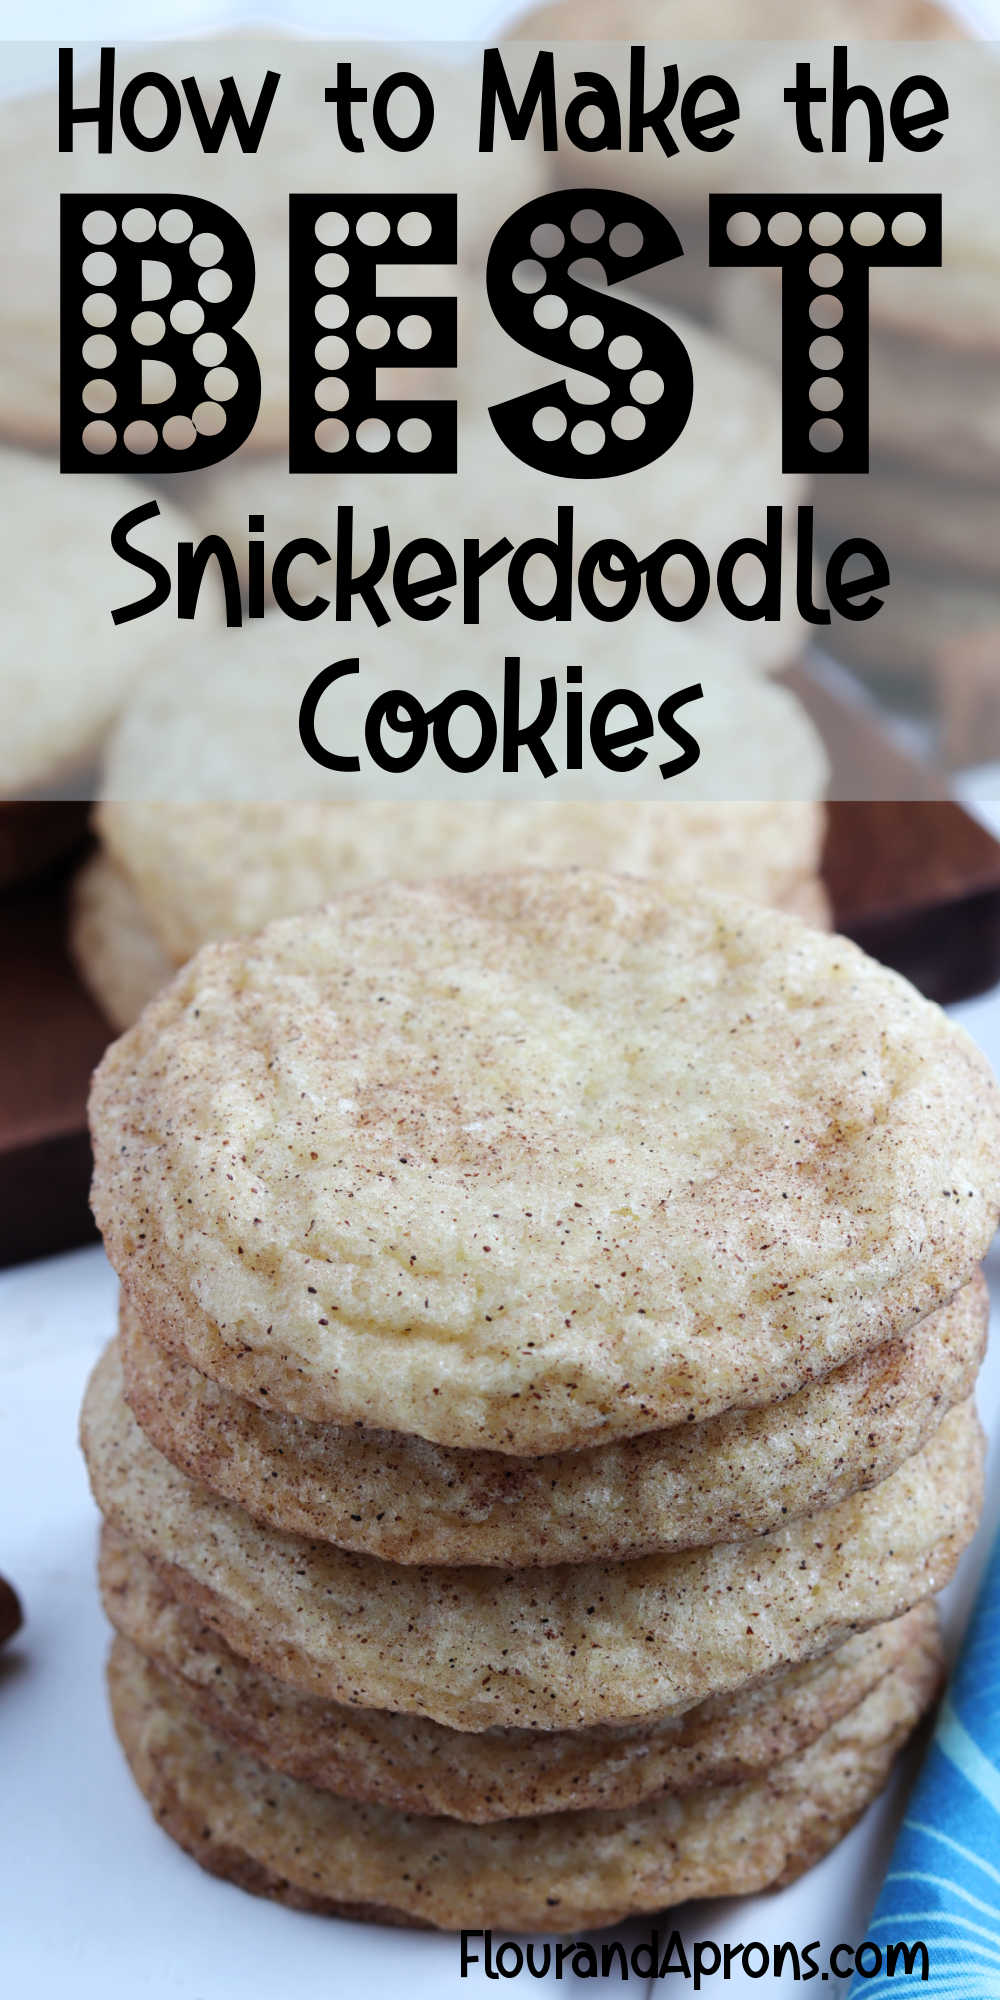 Pin image: pic of stack of snickerdoodle cookies with the words "How to Make the BEST snickerdoodle cookies".